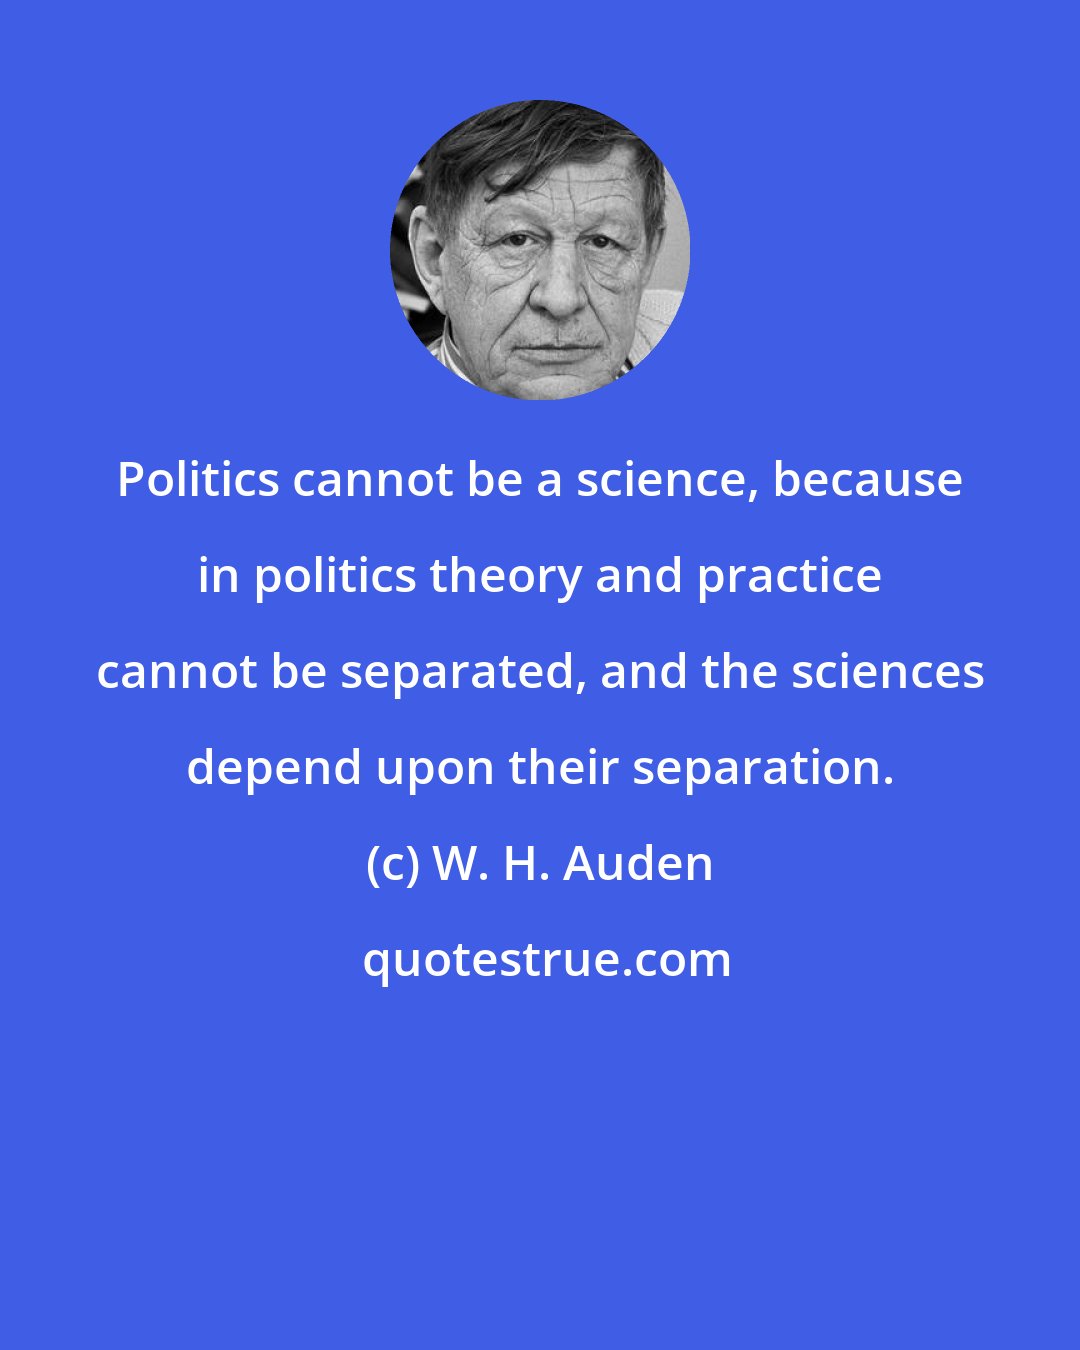 W. H. Auden: Politics cannot be a science, because in politics theory and practice cannot be separated, and the sciences depend upon their separation.